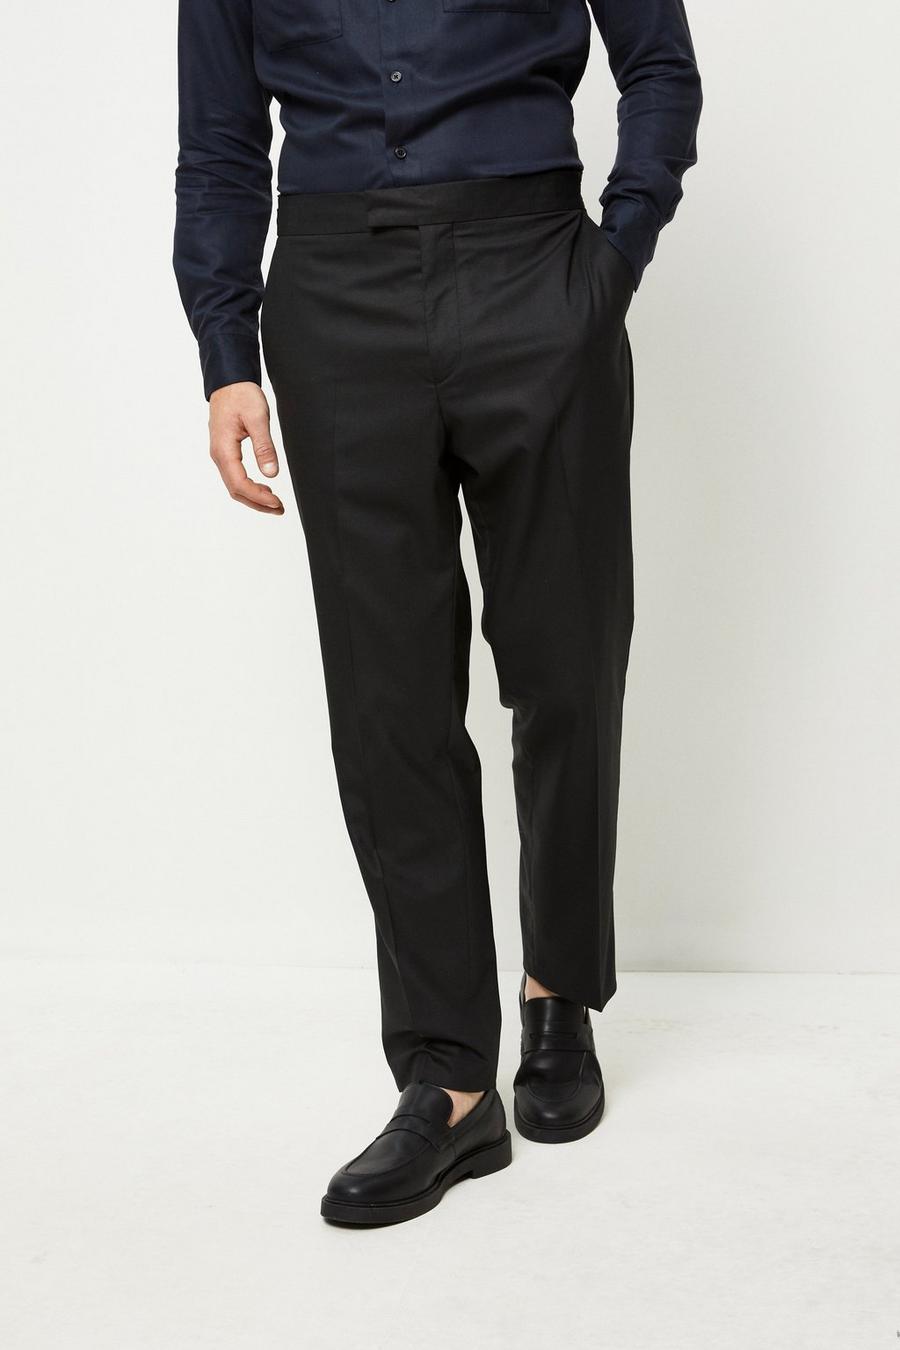 194 Tailored Fit Black Suit Trousers